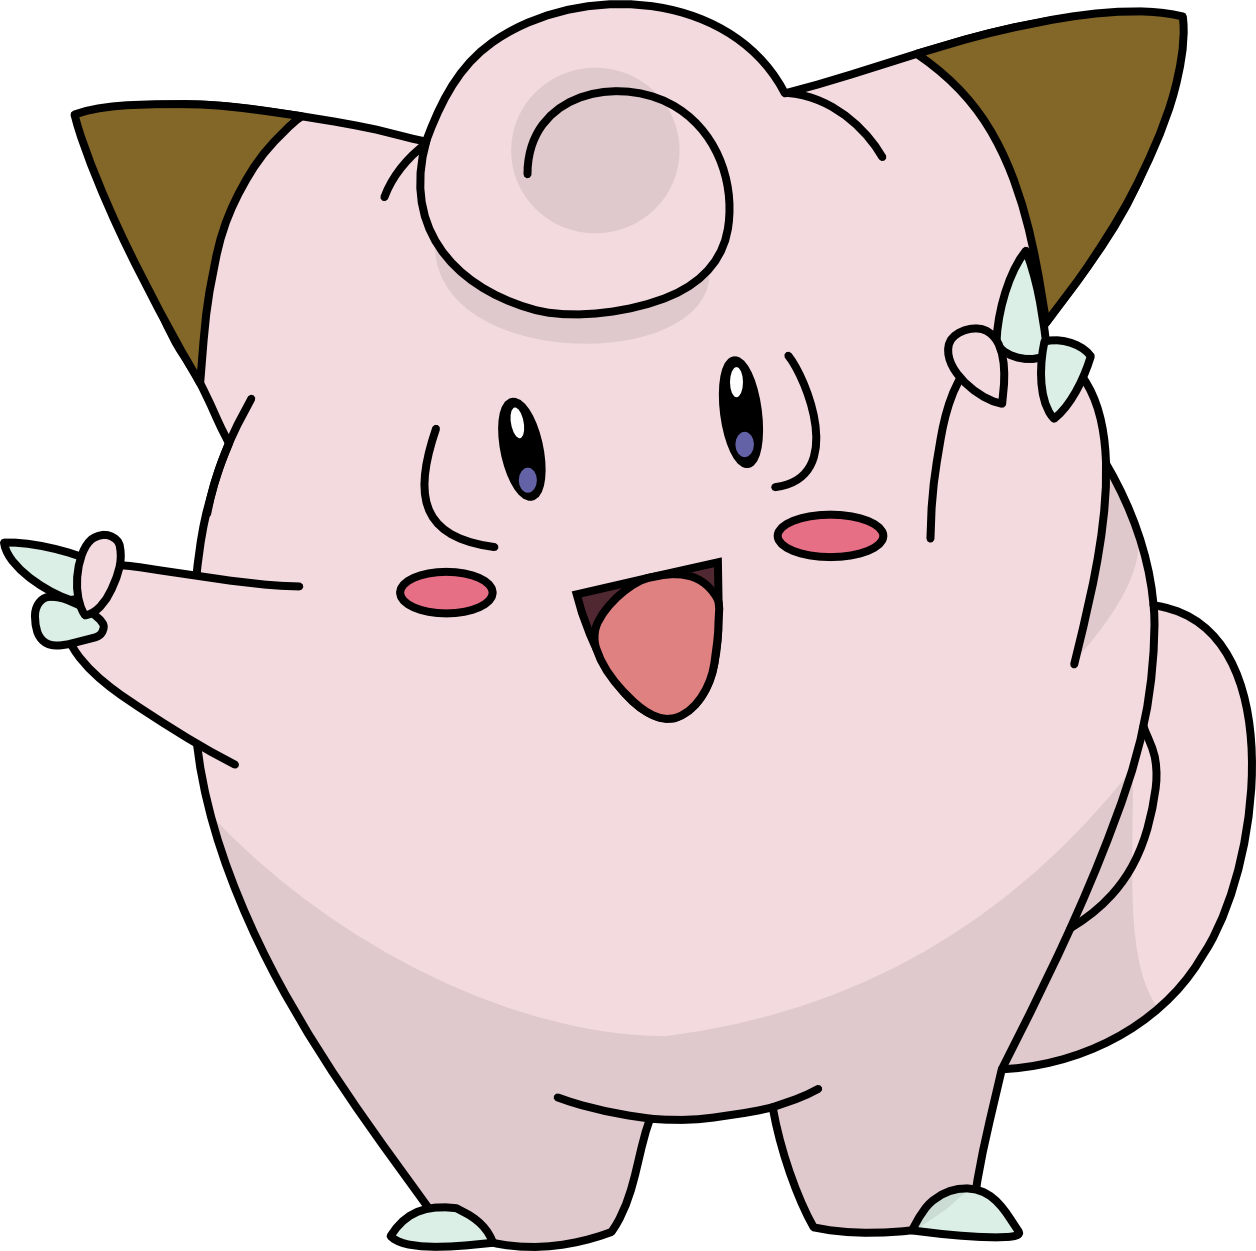 Clefairy Pokemon Download PNG Image